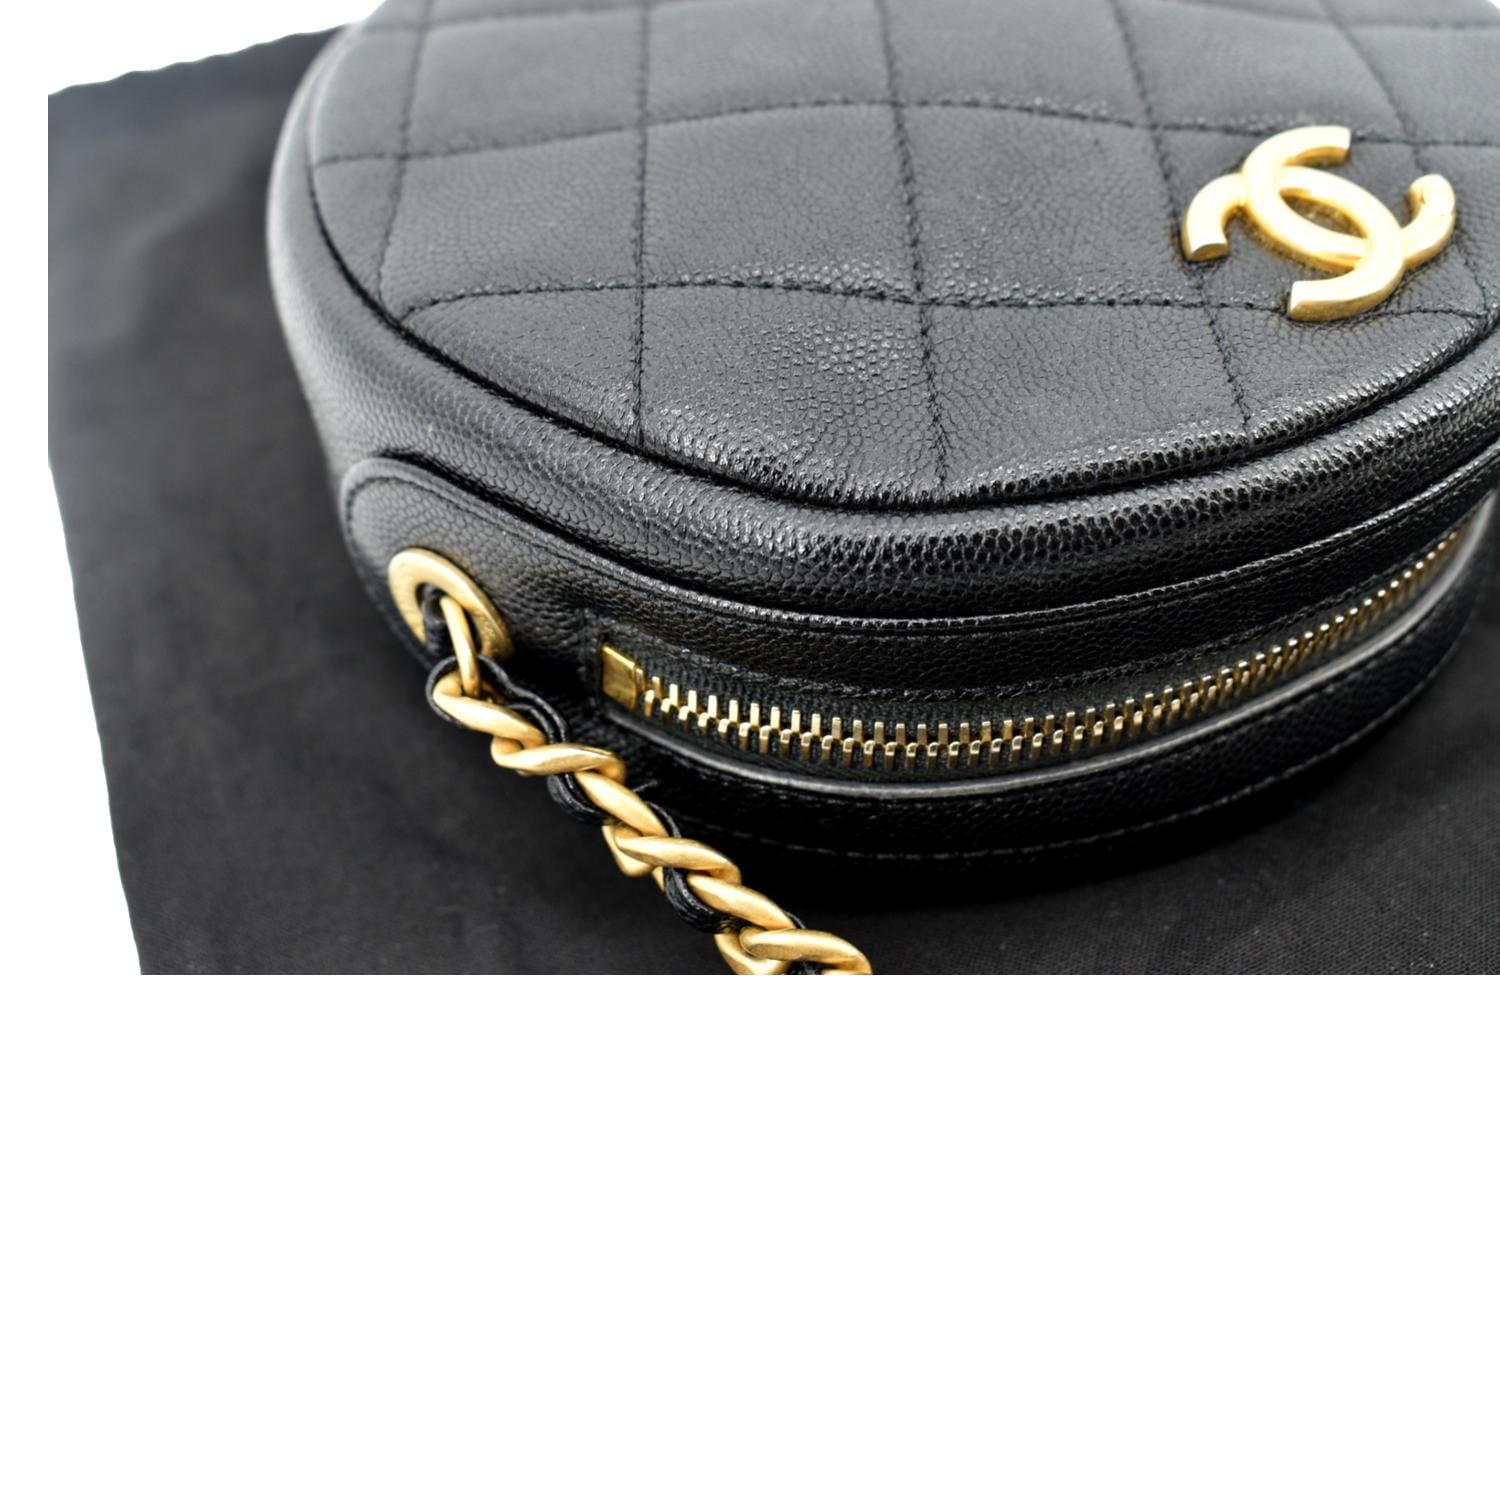 Chanel Round Quilted Caviar Leather Clutch Crossbody Bag Black